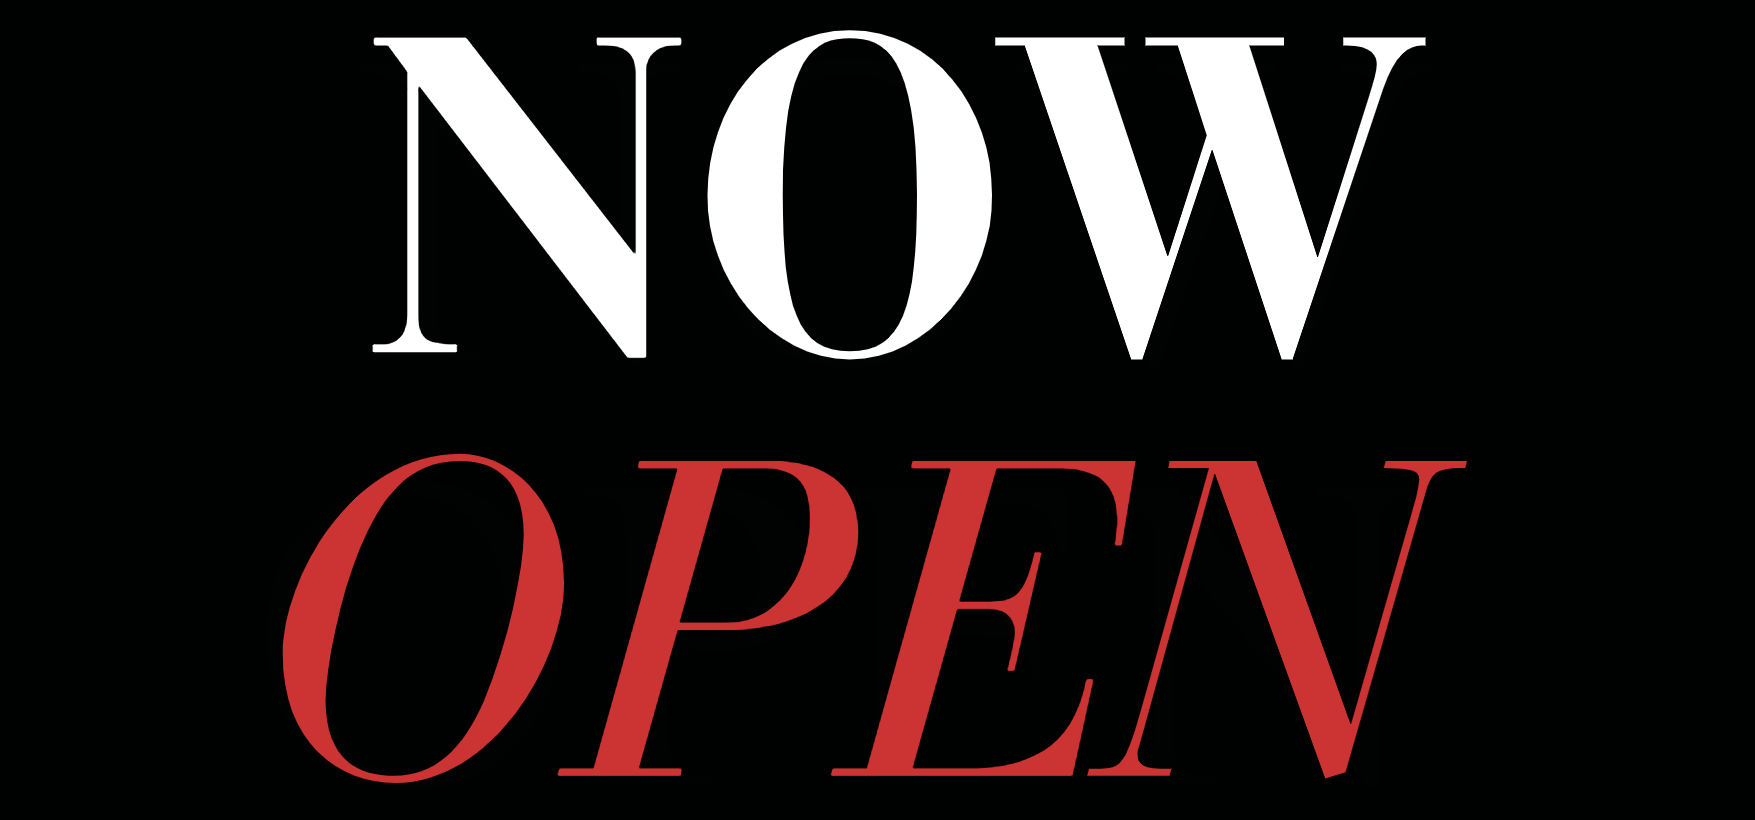 Text reads "Now Open" in white and red font with a black background.